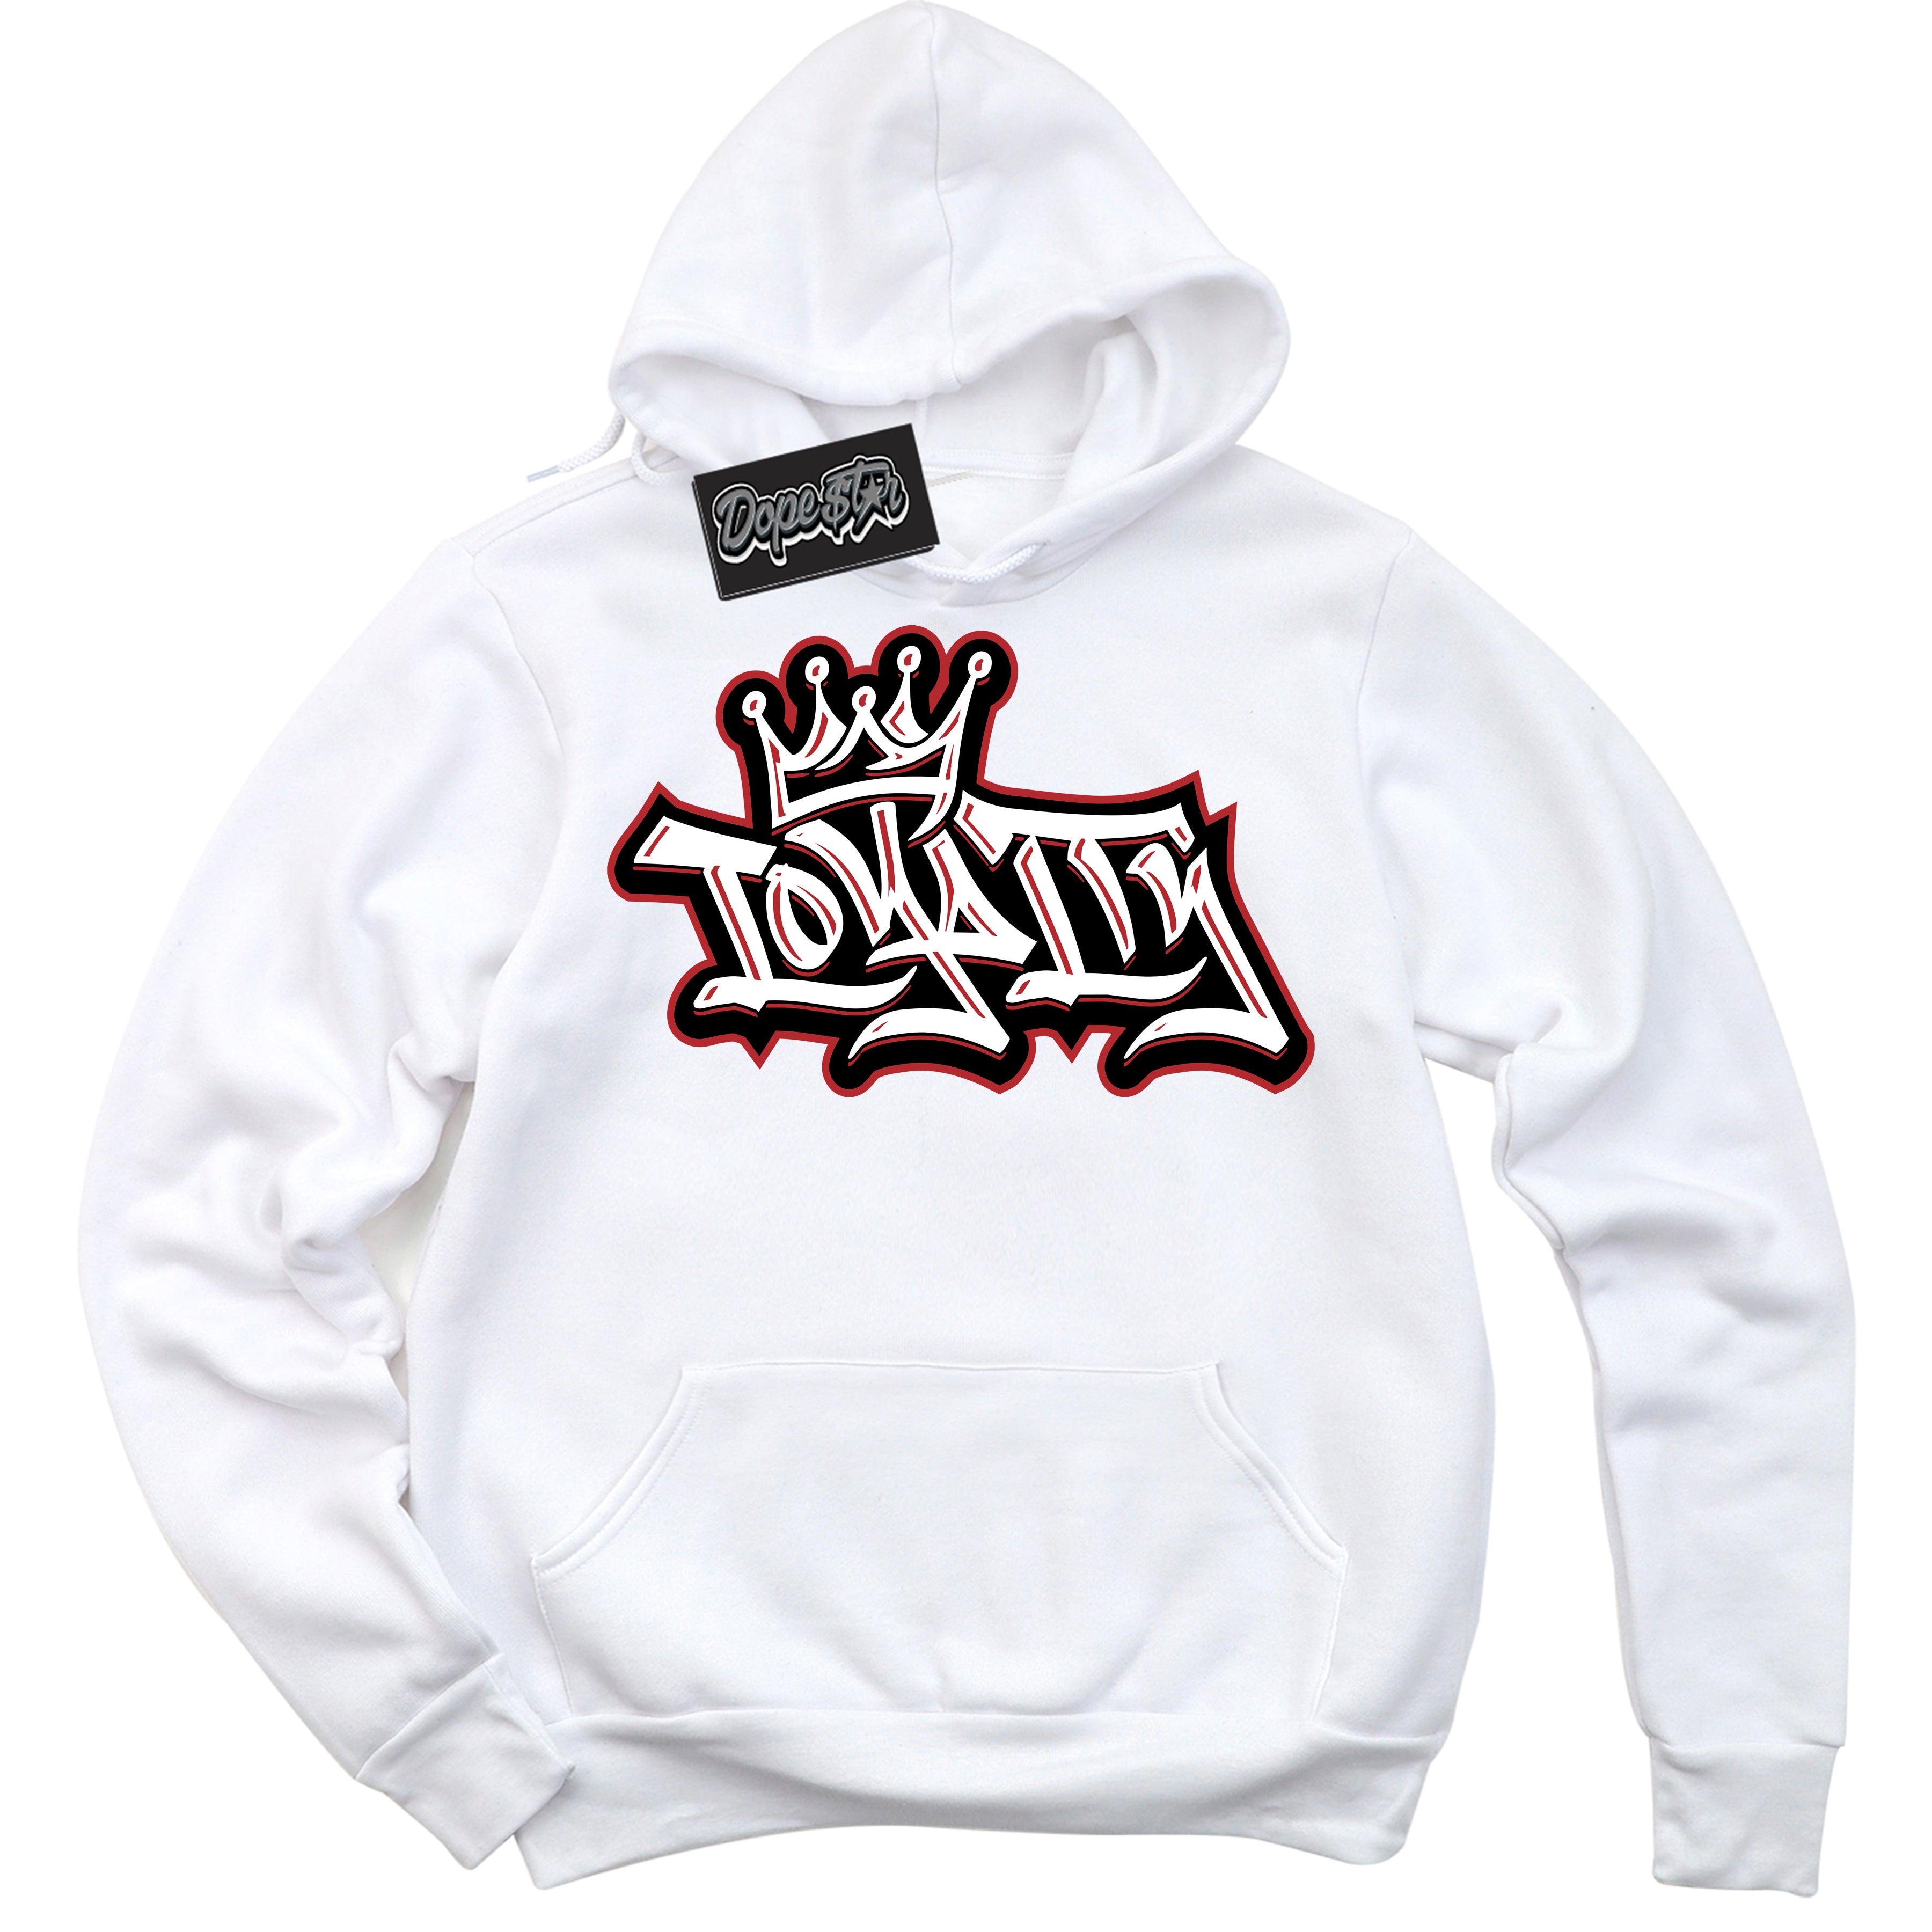 Cool White Hoodie With “ Loyalty Crown “  Design That Perfectly Matches Lost And Found 1s Sneakers.